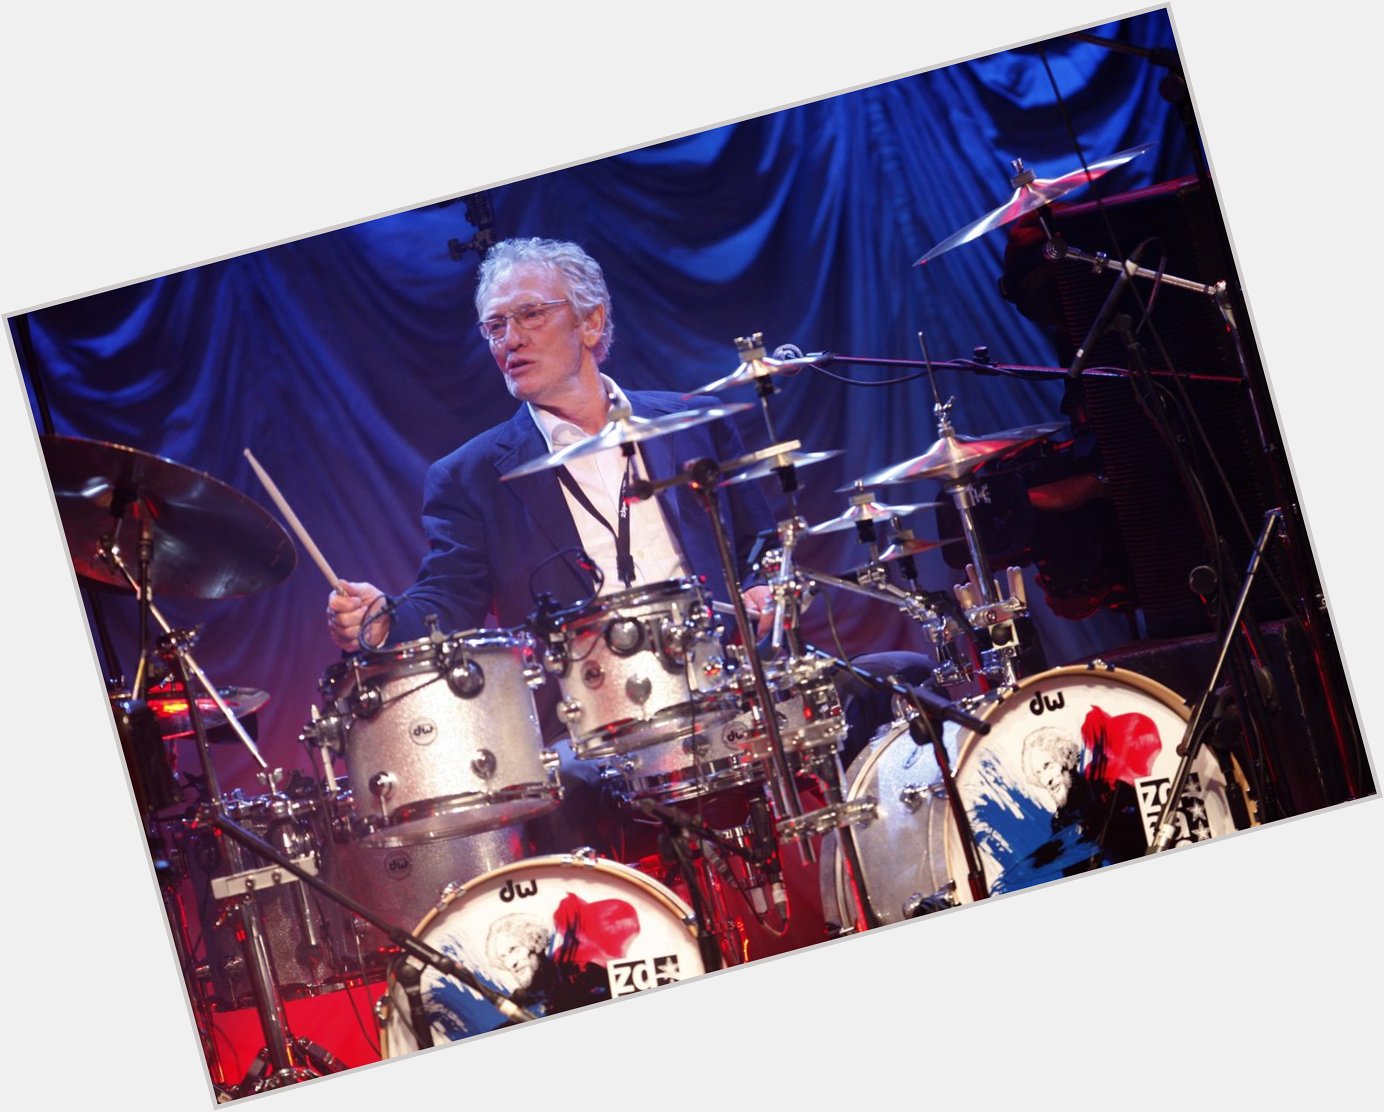 The amazing Ginger Baker would have been 82 today. A Happy Birthday to one of the worlds greatest drummers. 